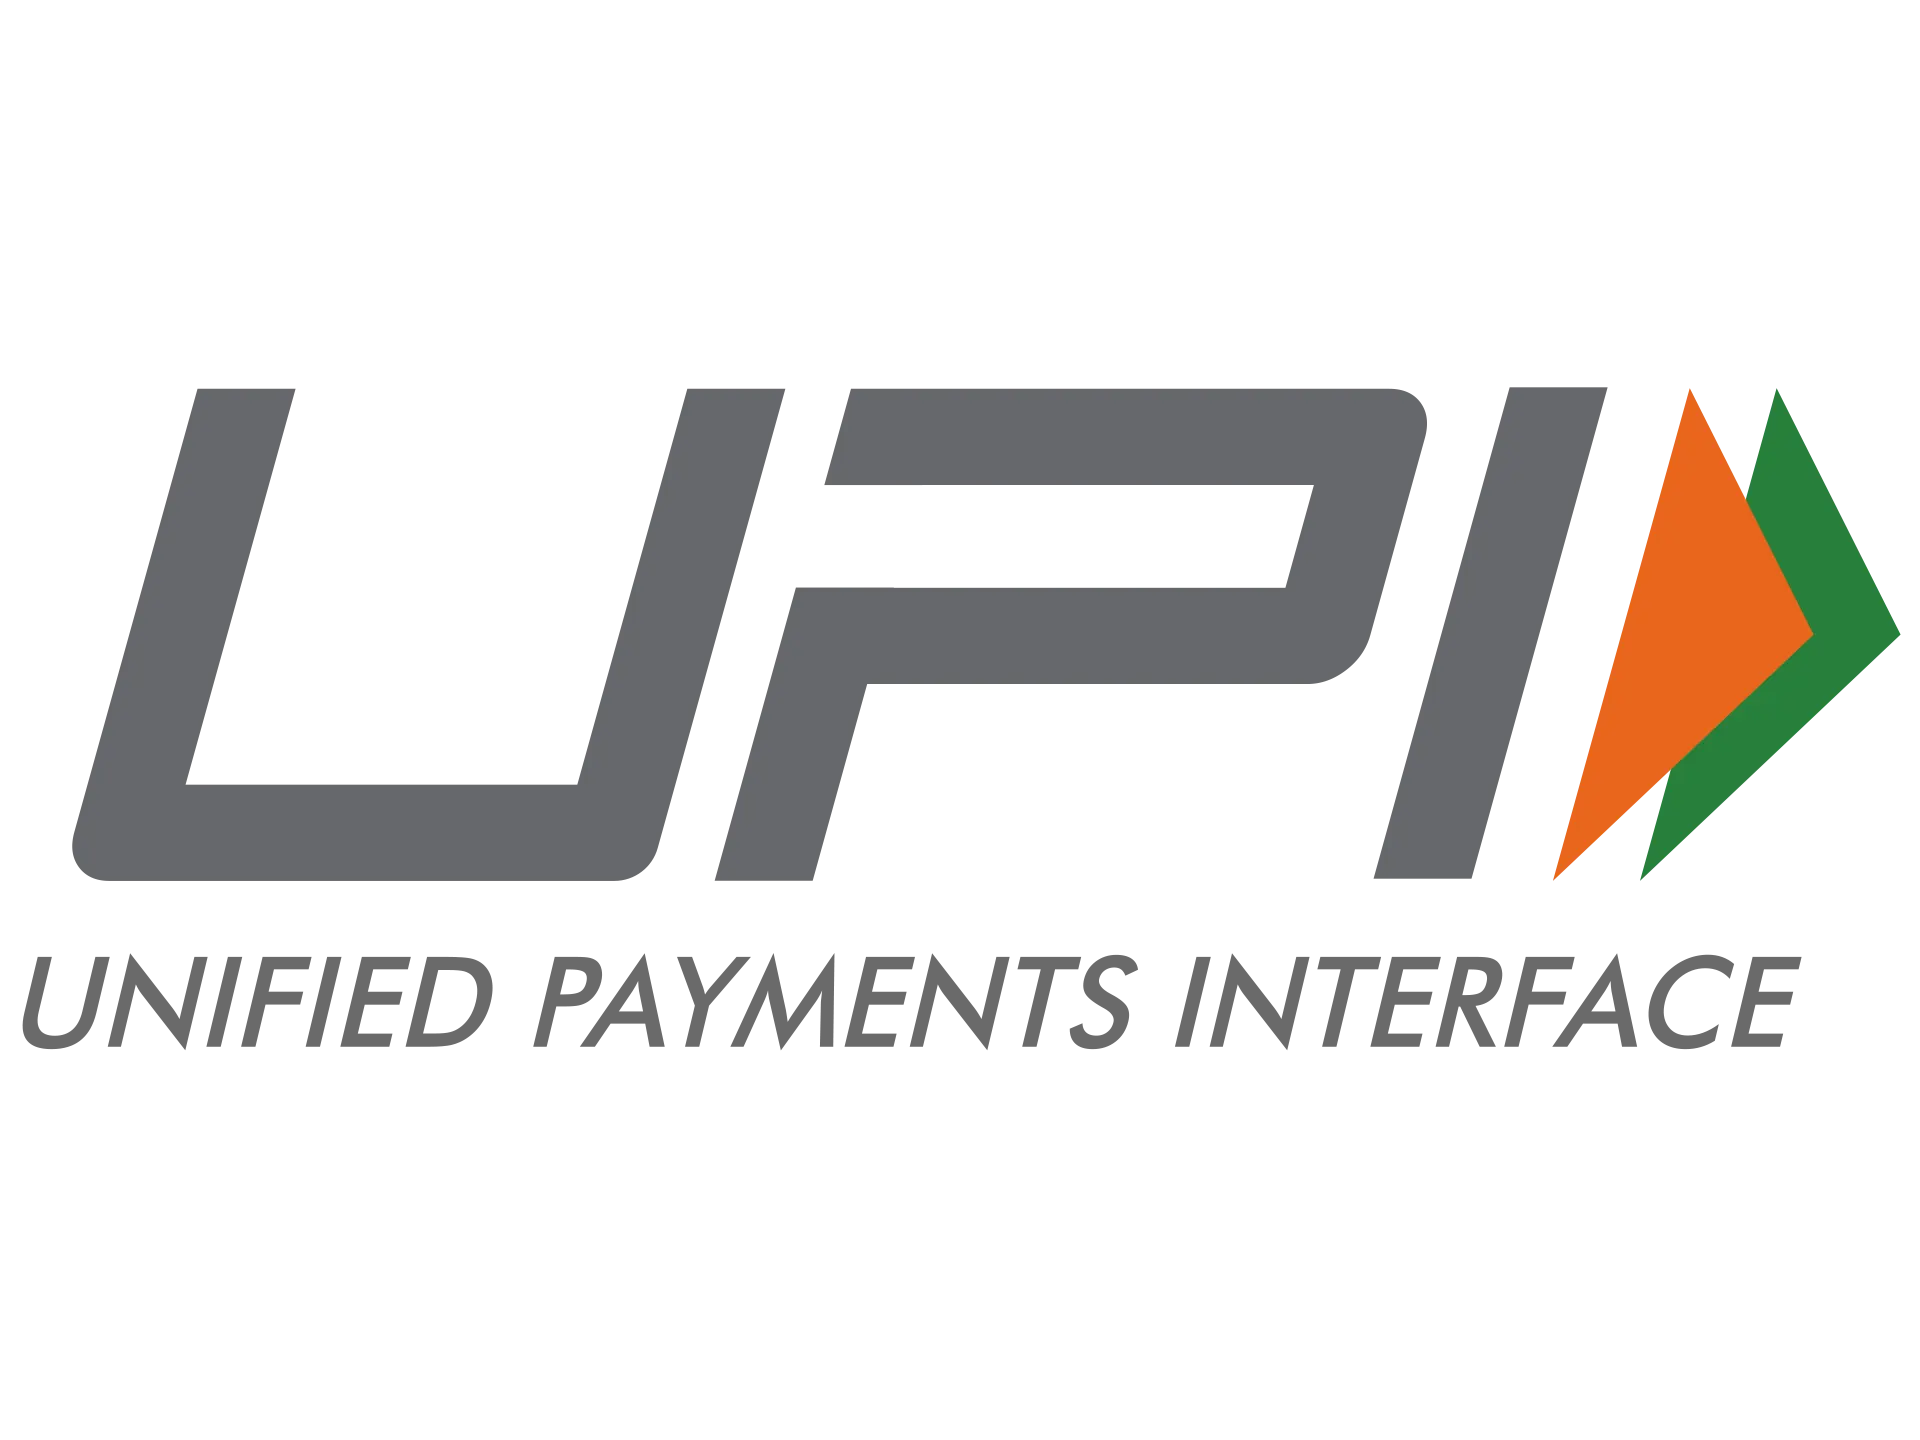 UPI, by NPCI, enables secure cashless transfers between bank accounts, providing quality and safe payment options in India.